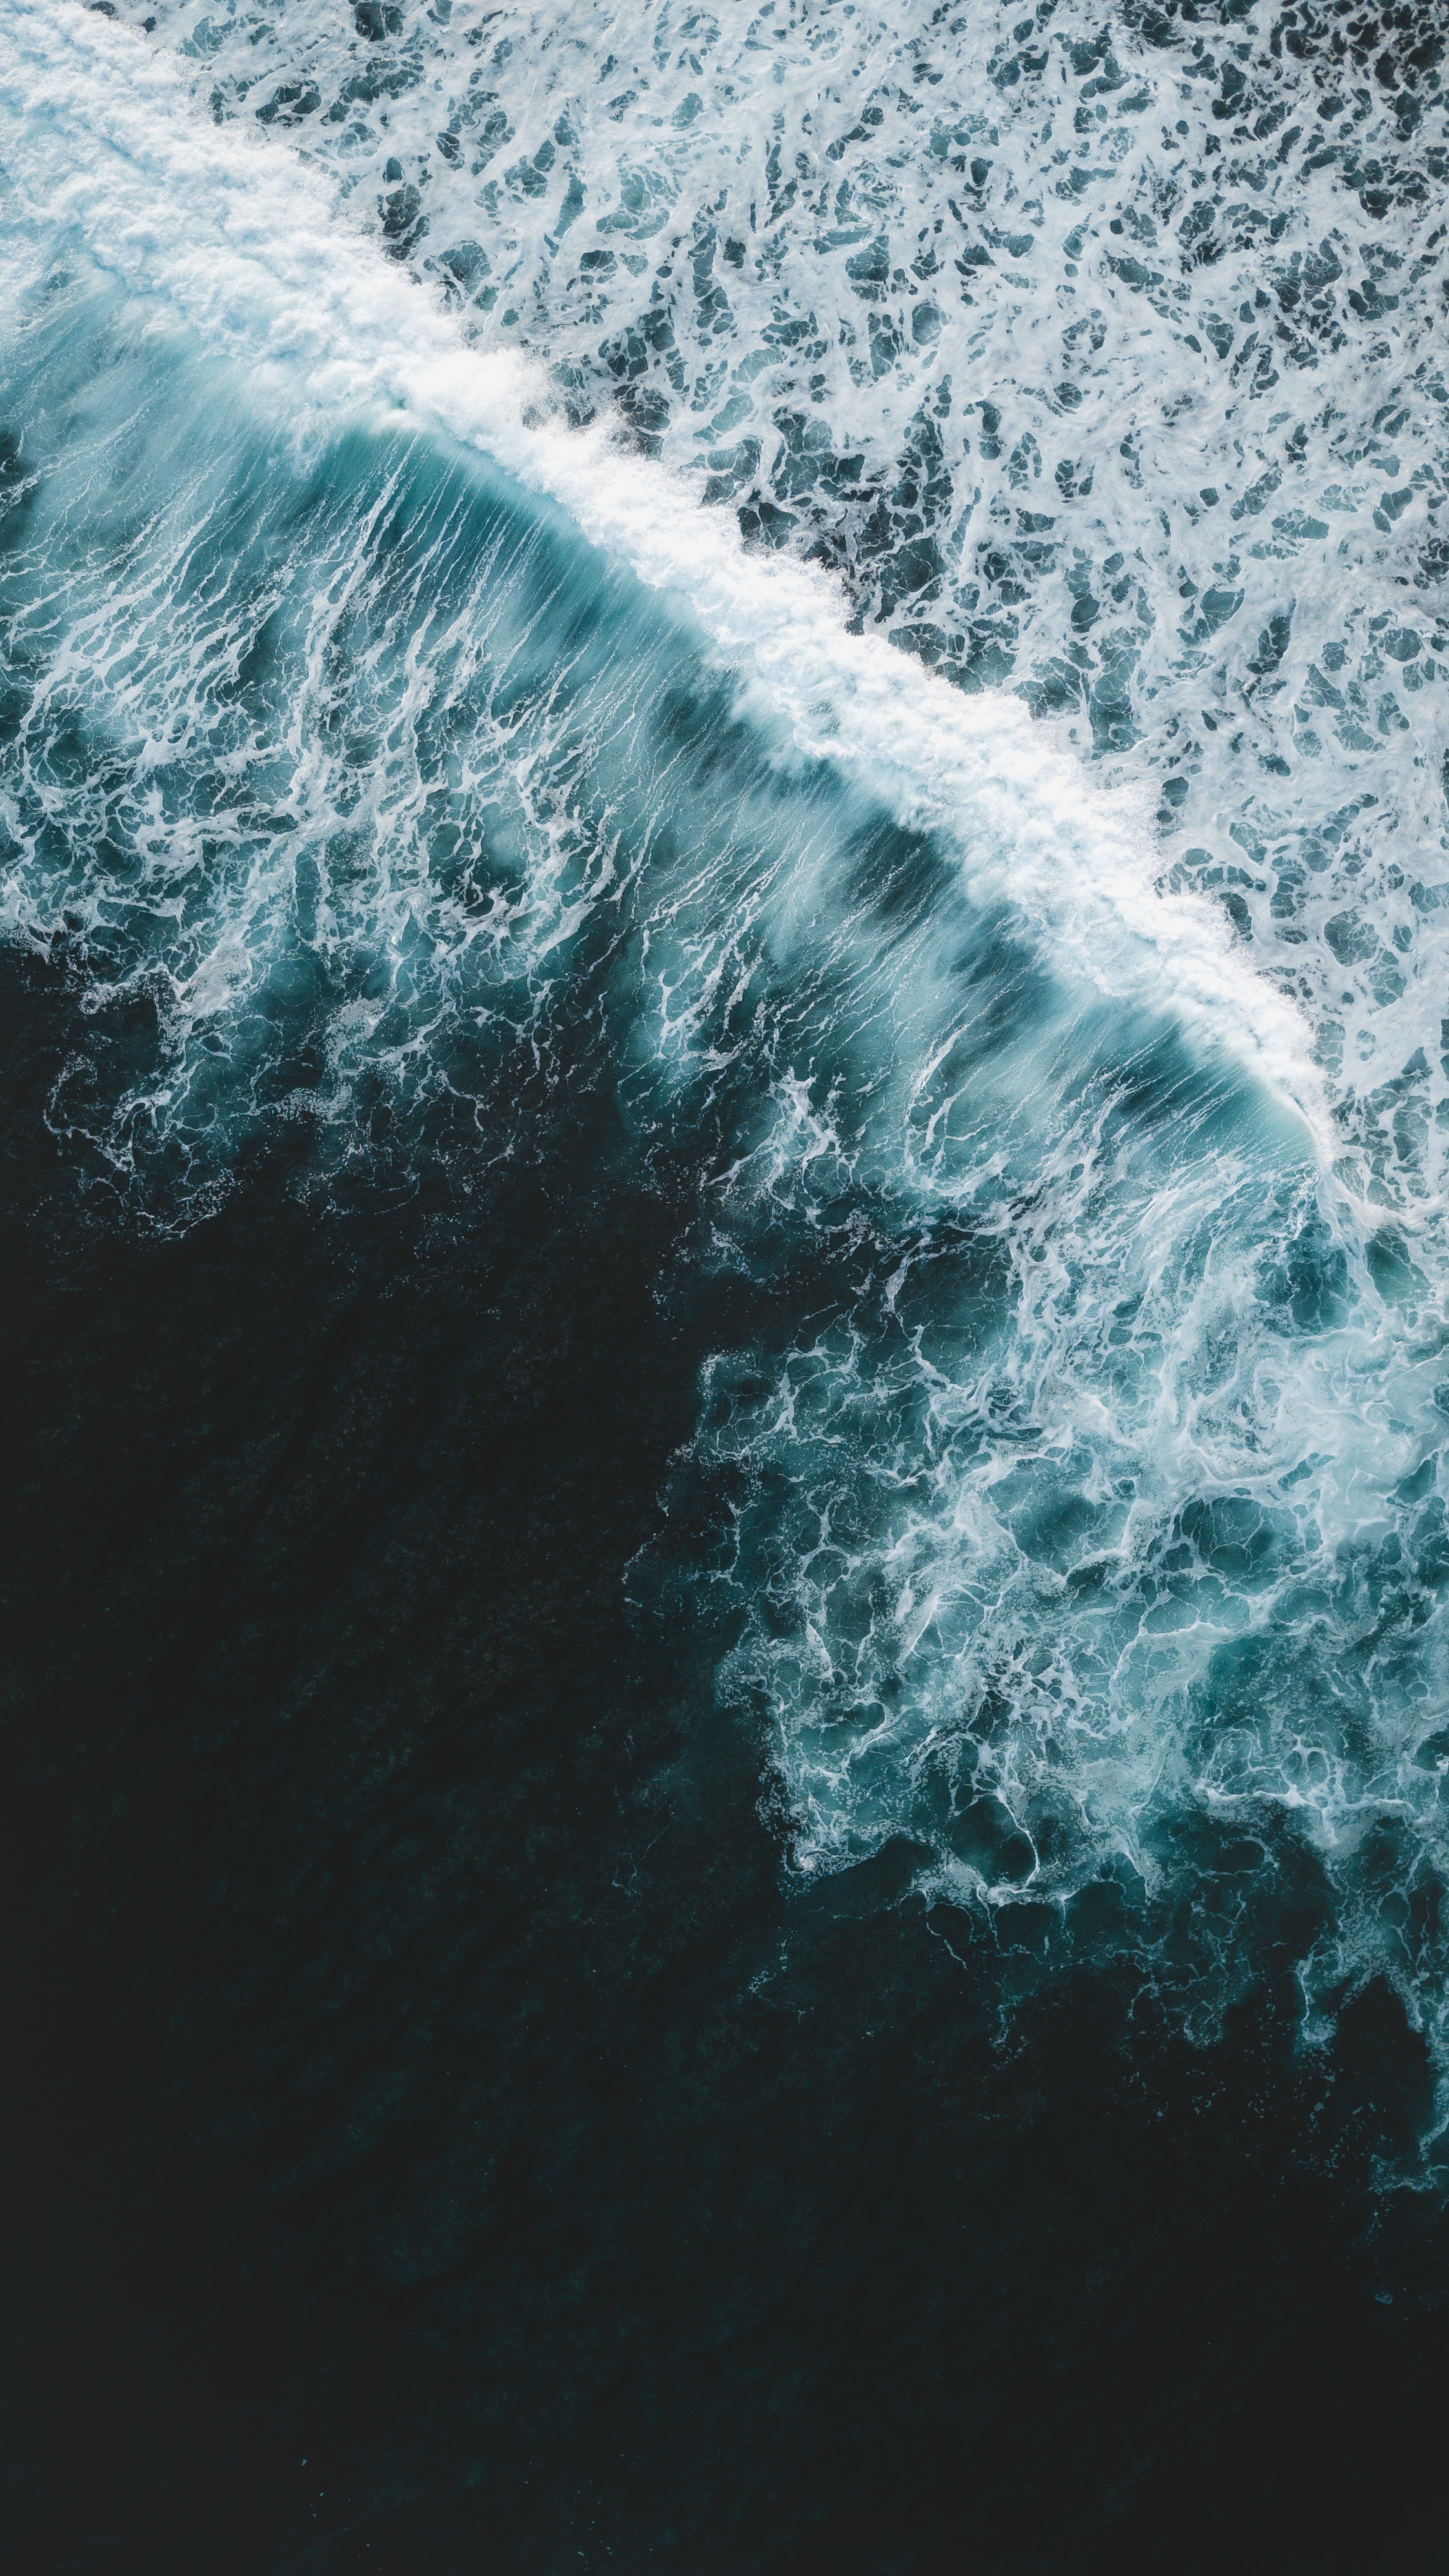 New Lock Screen Wallpapers ocean, nature, water, waves, view from above, surf